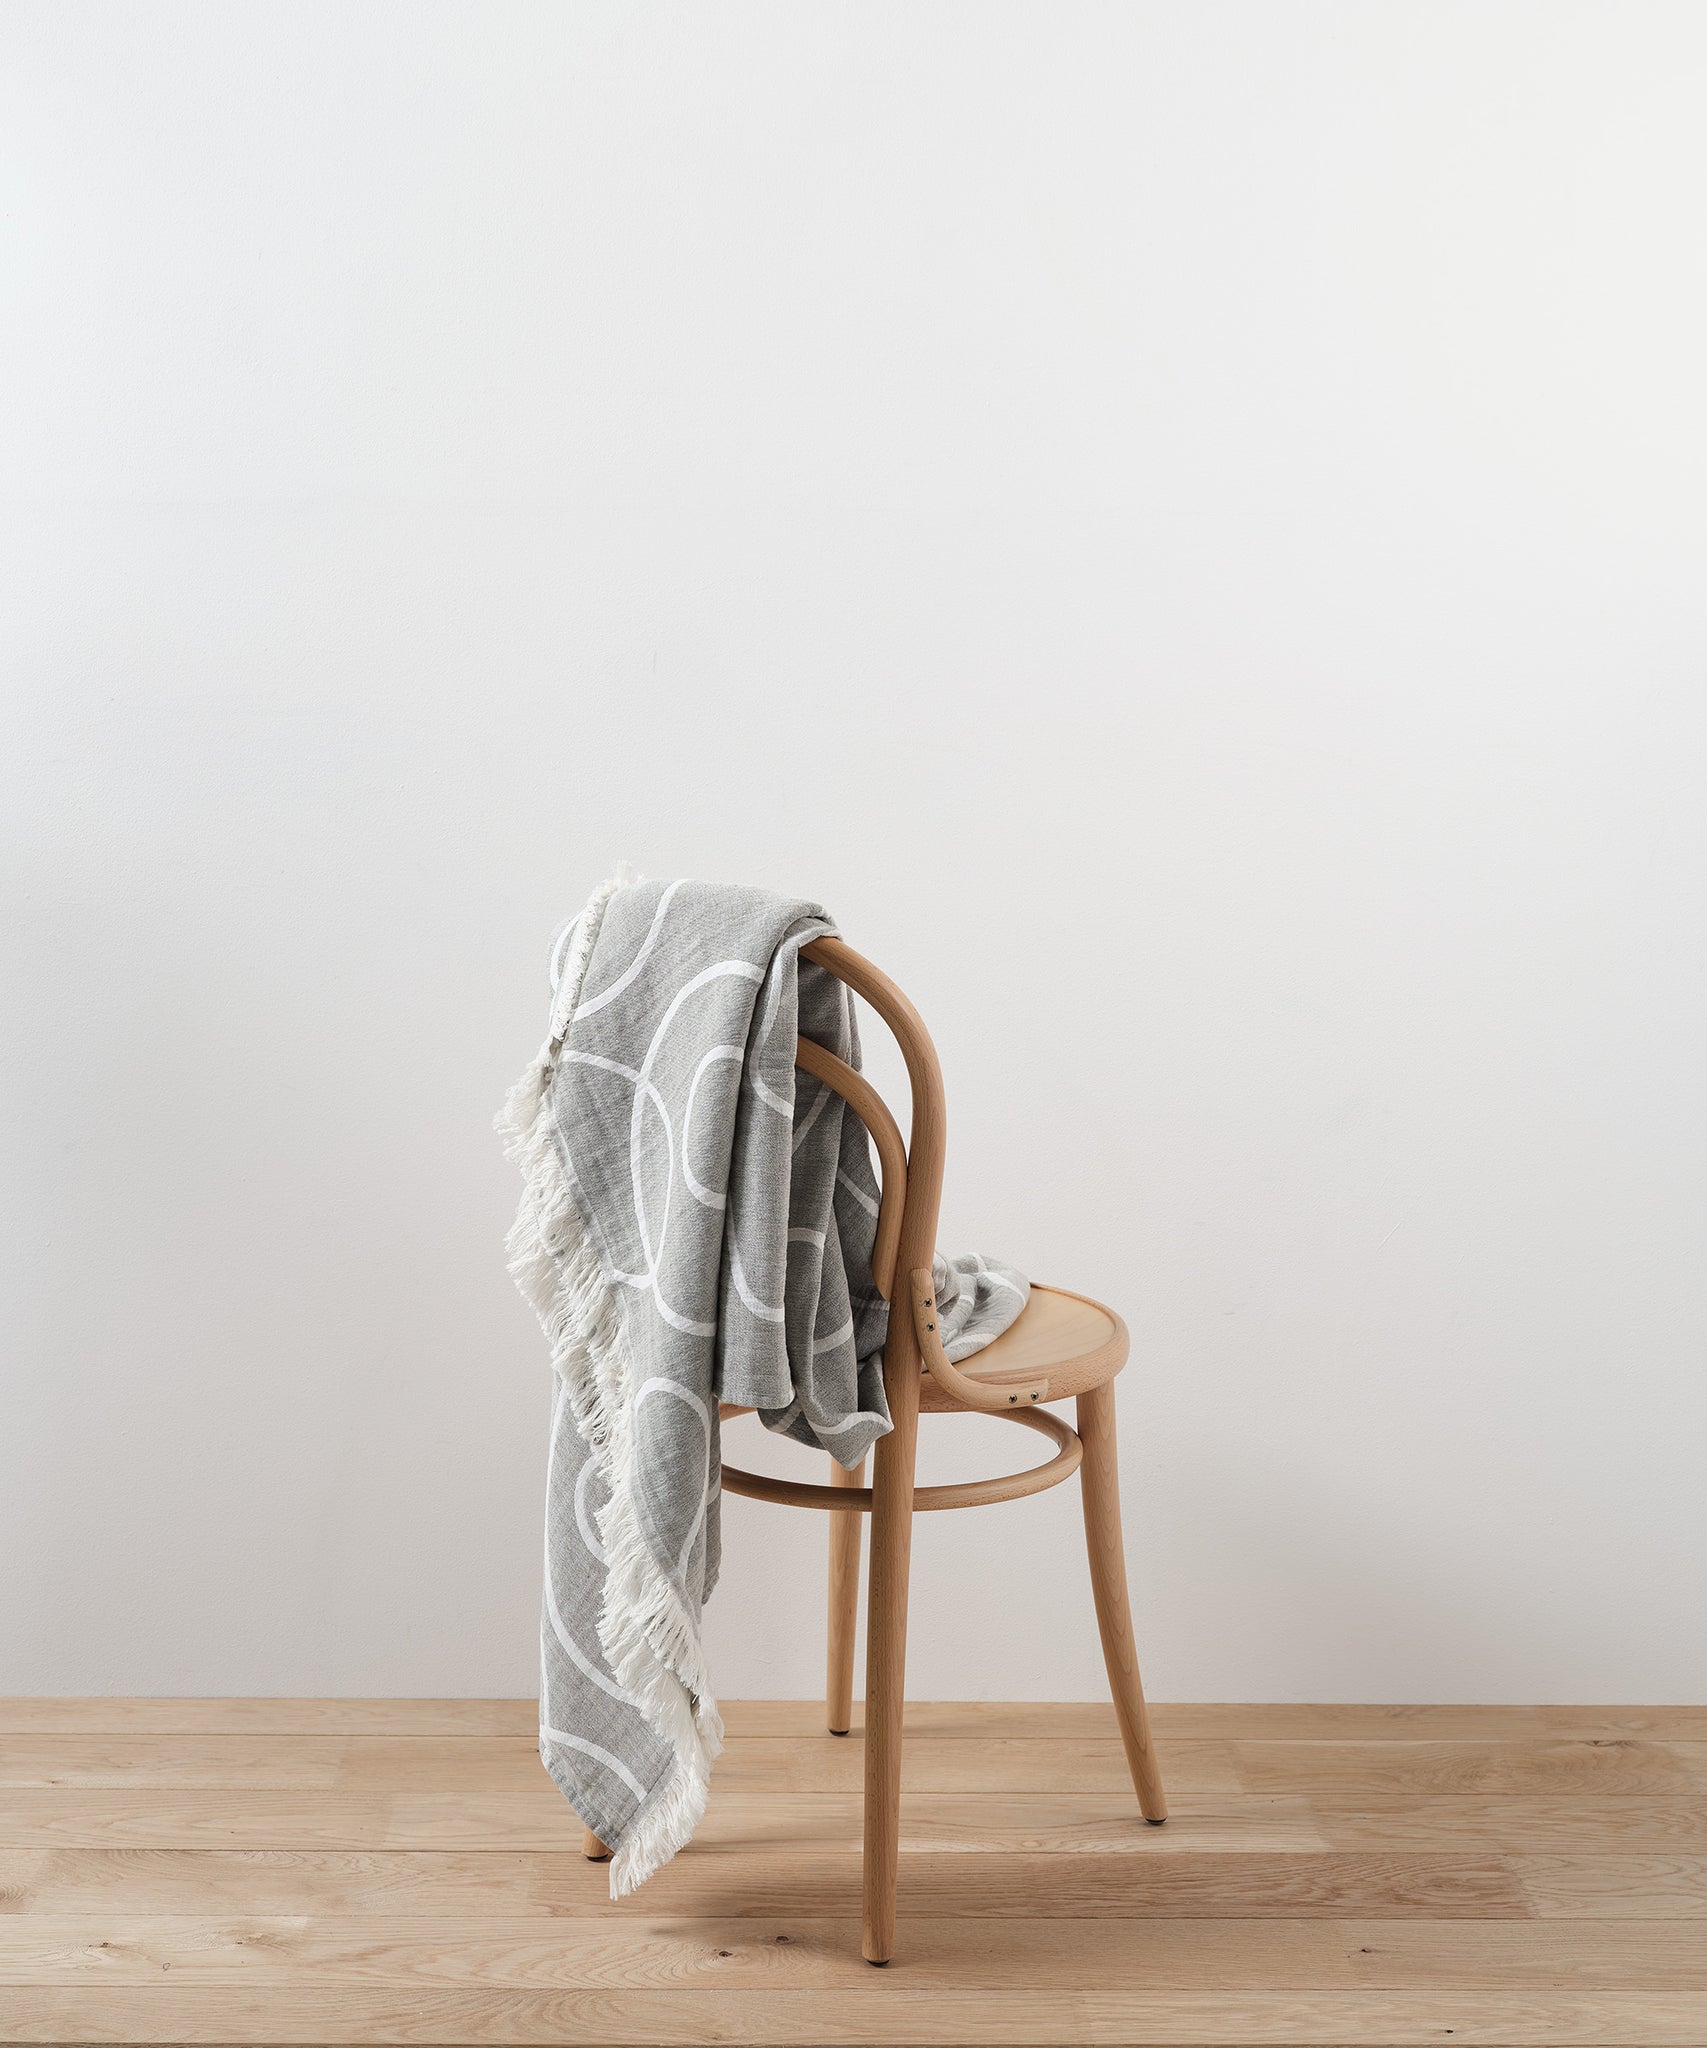 Patterned recycled cotton throw blanket on chair